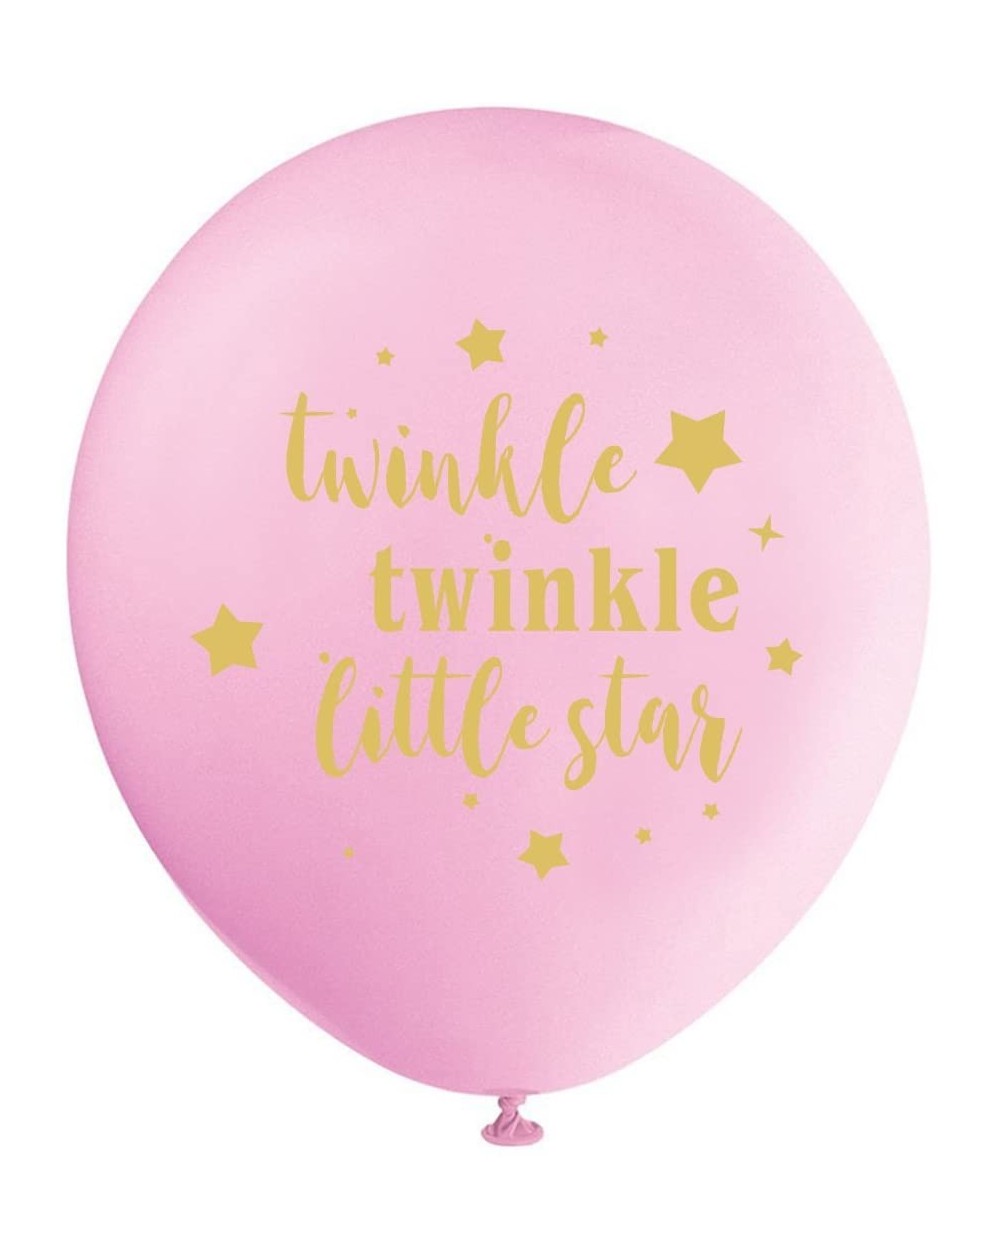 Balloons Pink Twinkle Twinkle Little Star Balloons- 12inch (16pcs) Girl Baby Shower or Birthday Party Decorations Supplies - ...